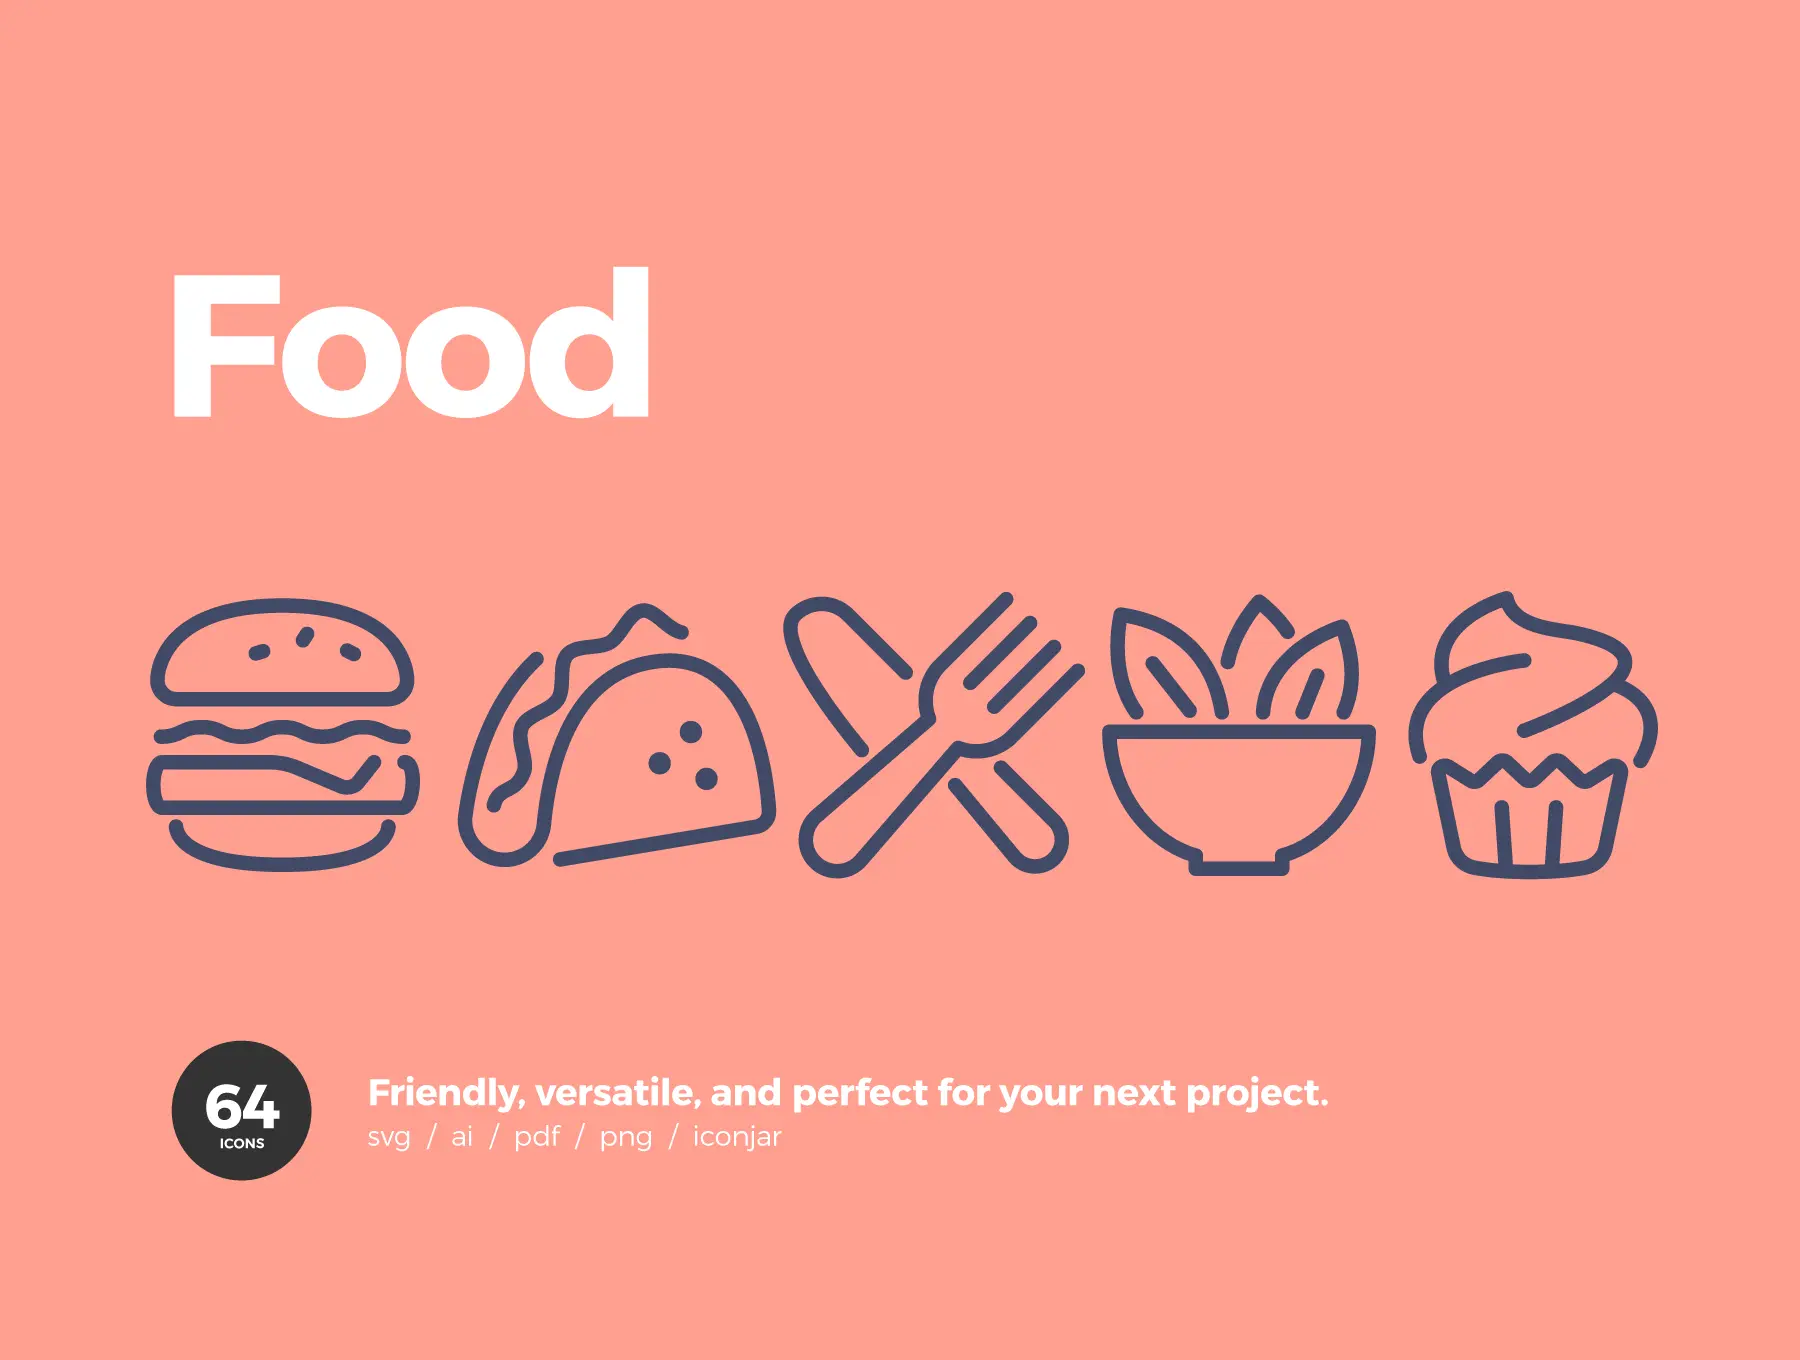 food-icons-vector-line-icon-set-1_1636477202909